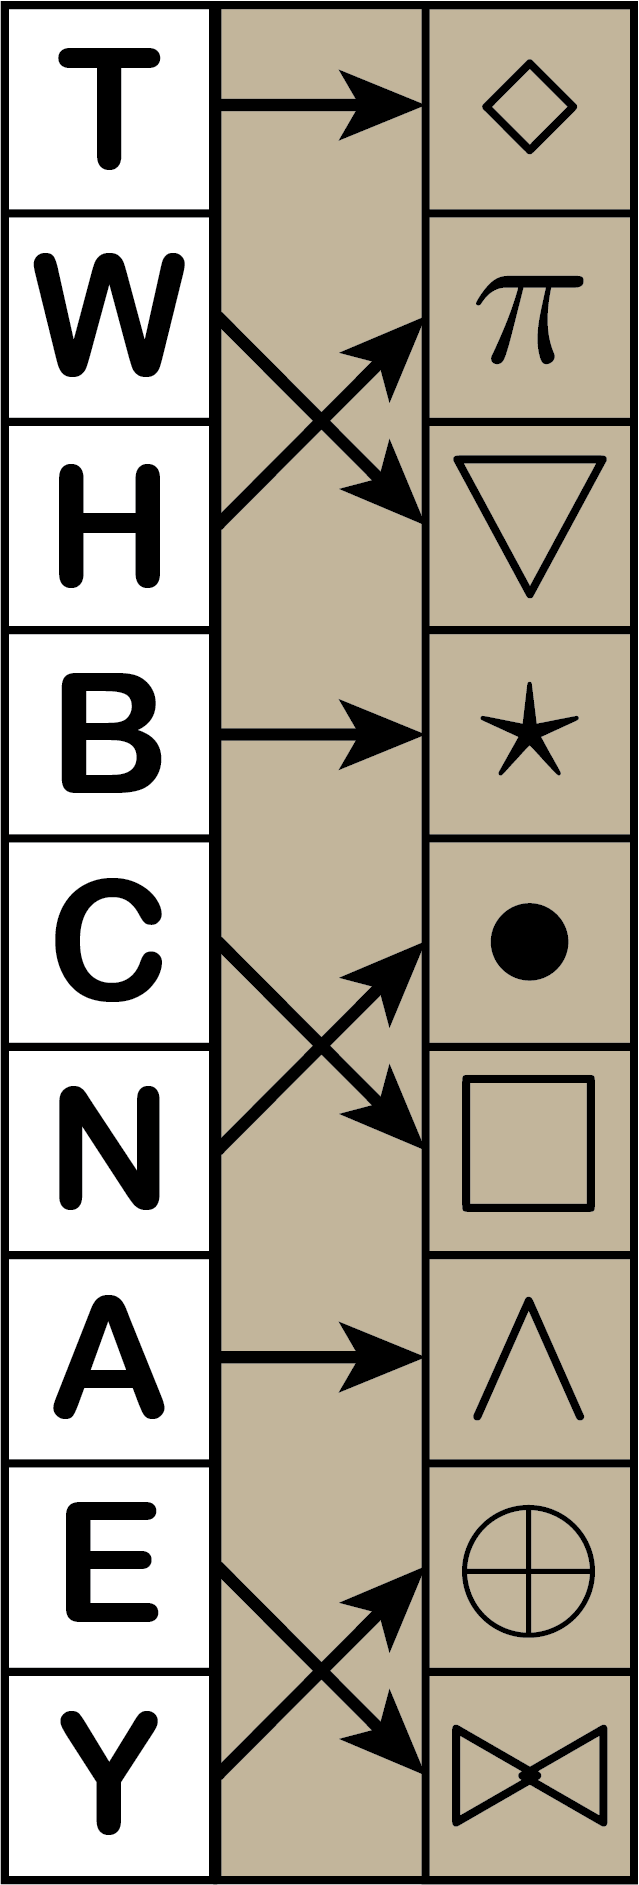 The order of the letters on the left strip is T, W, H, B, C,
    N, A, E, Y.